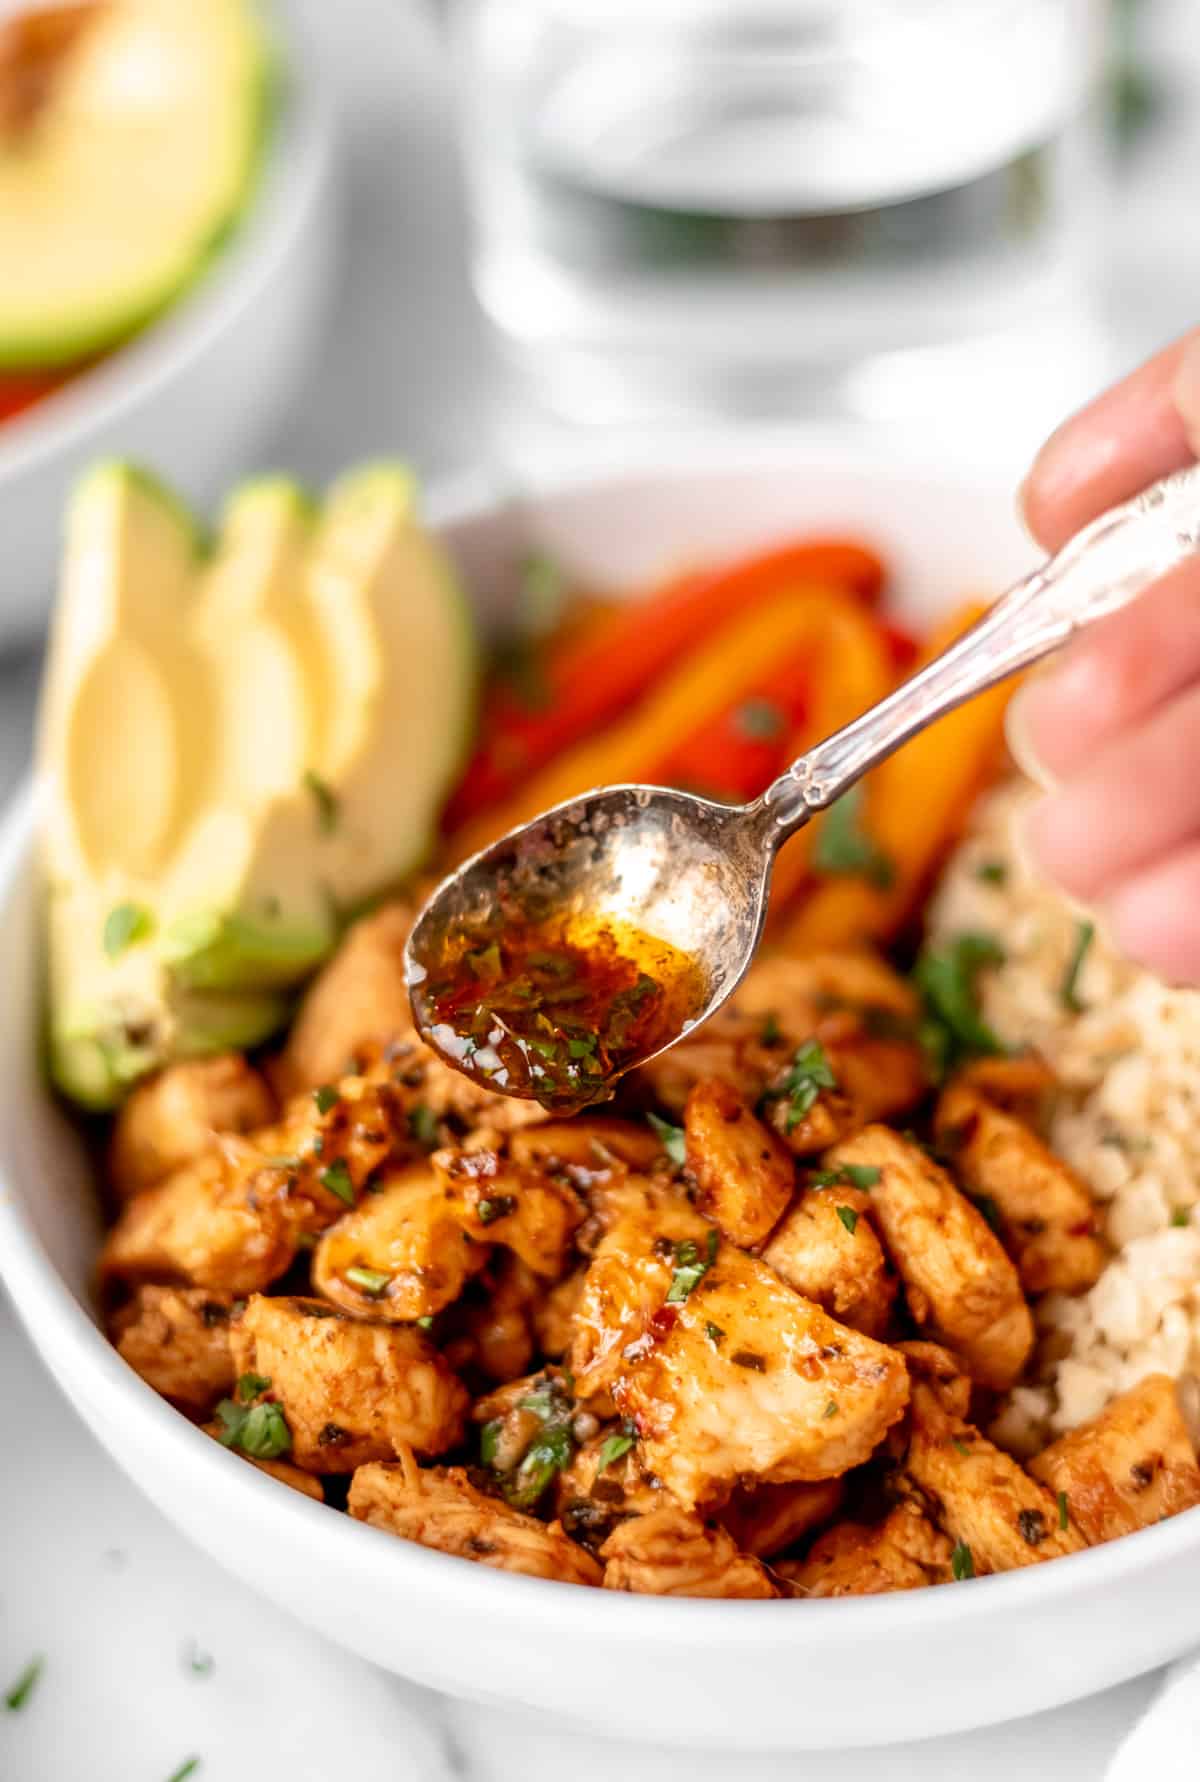 Fajita sauce being drizzled over a chicken fajita bowl with chunks of chicken, avocado, peppers and cauliflower rice in it.